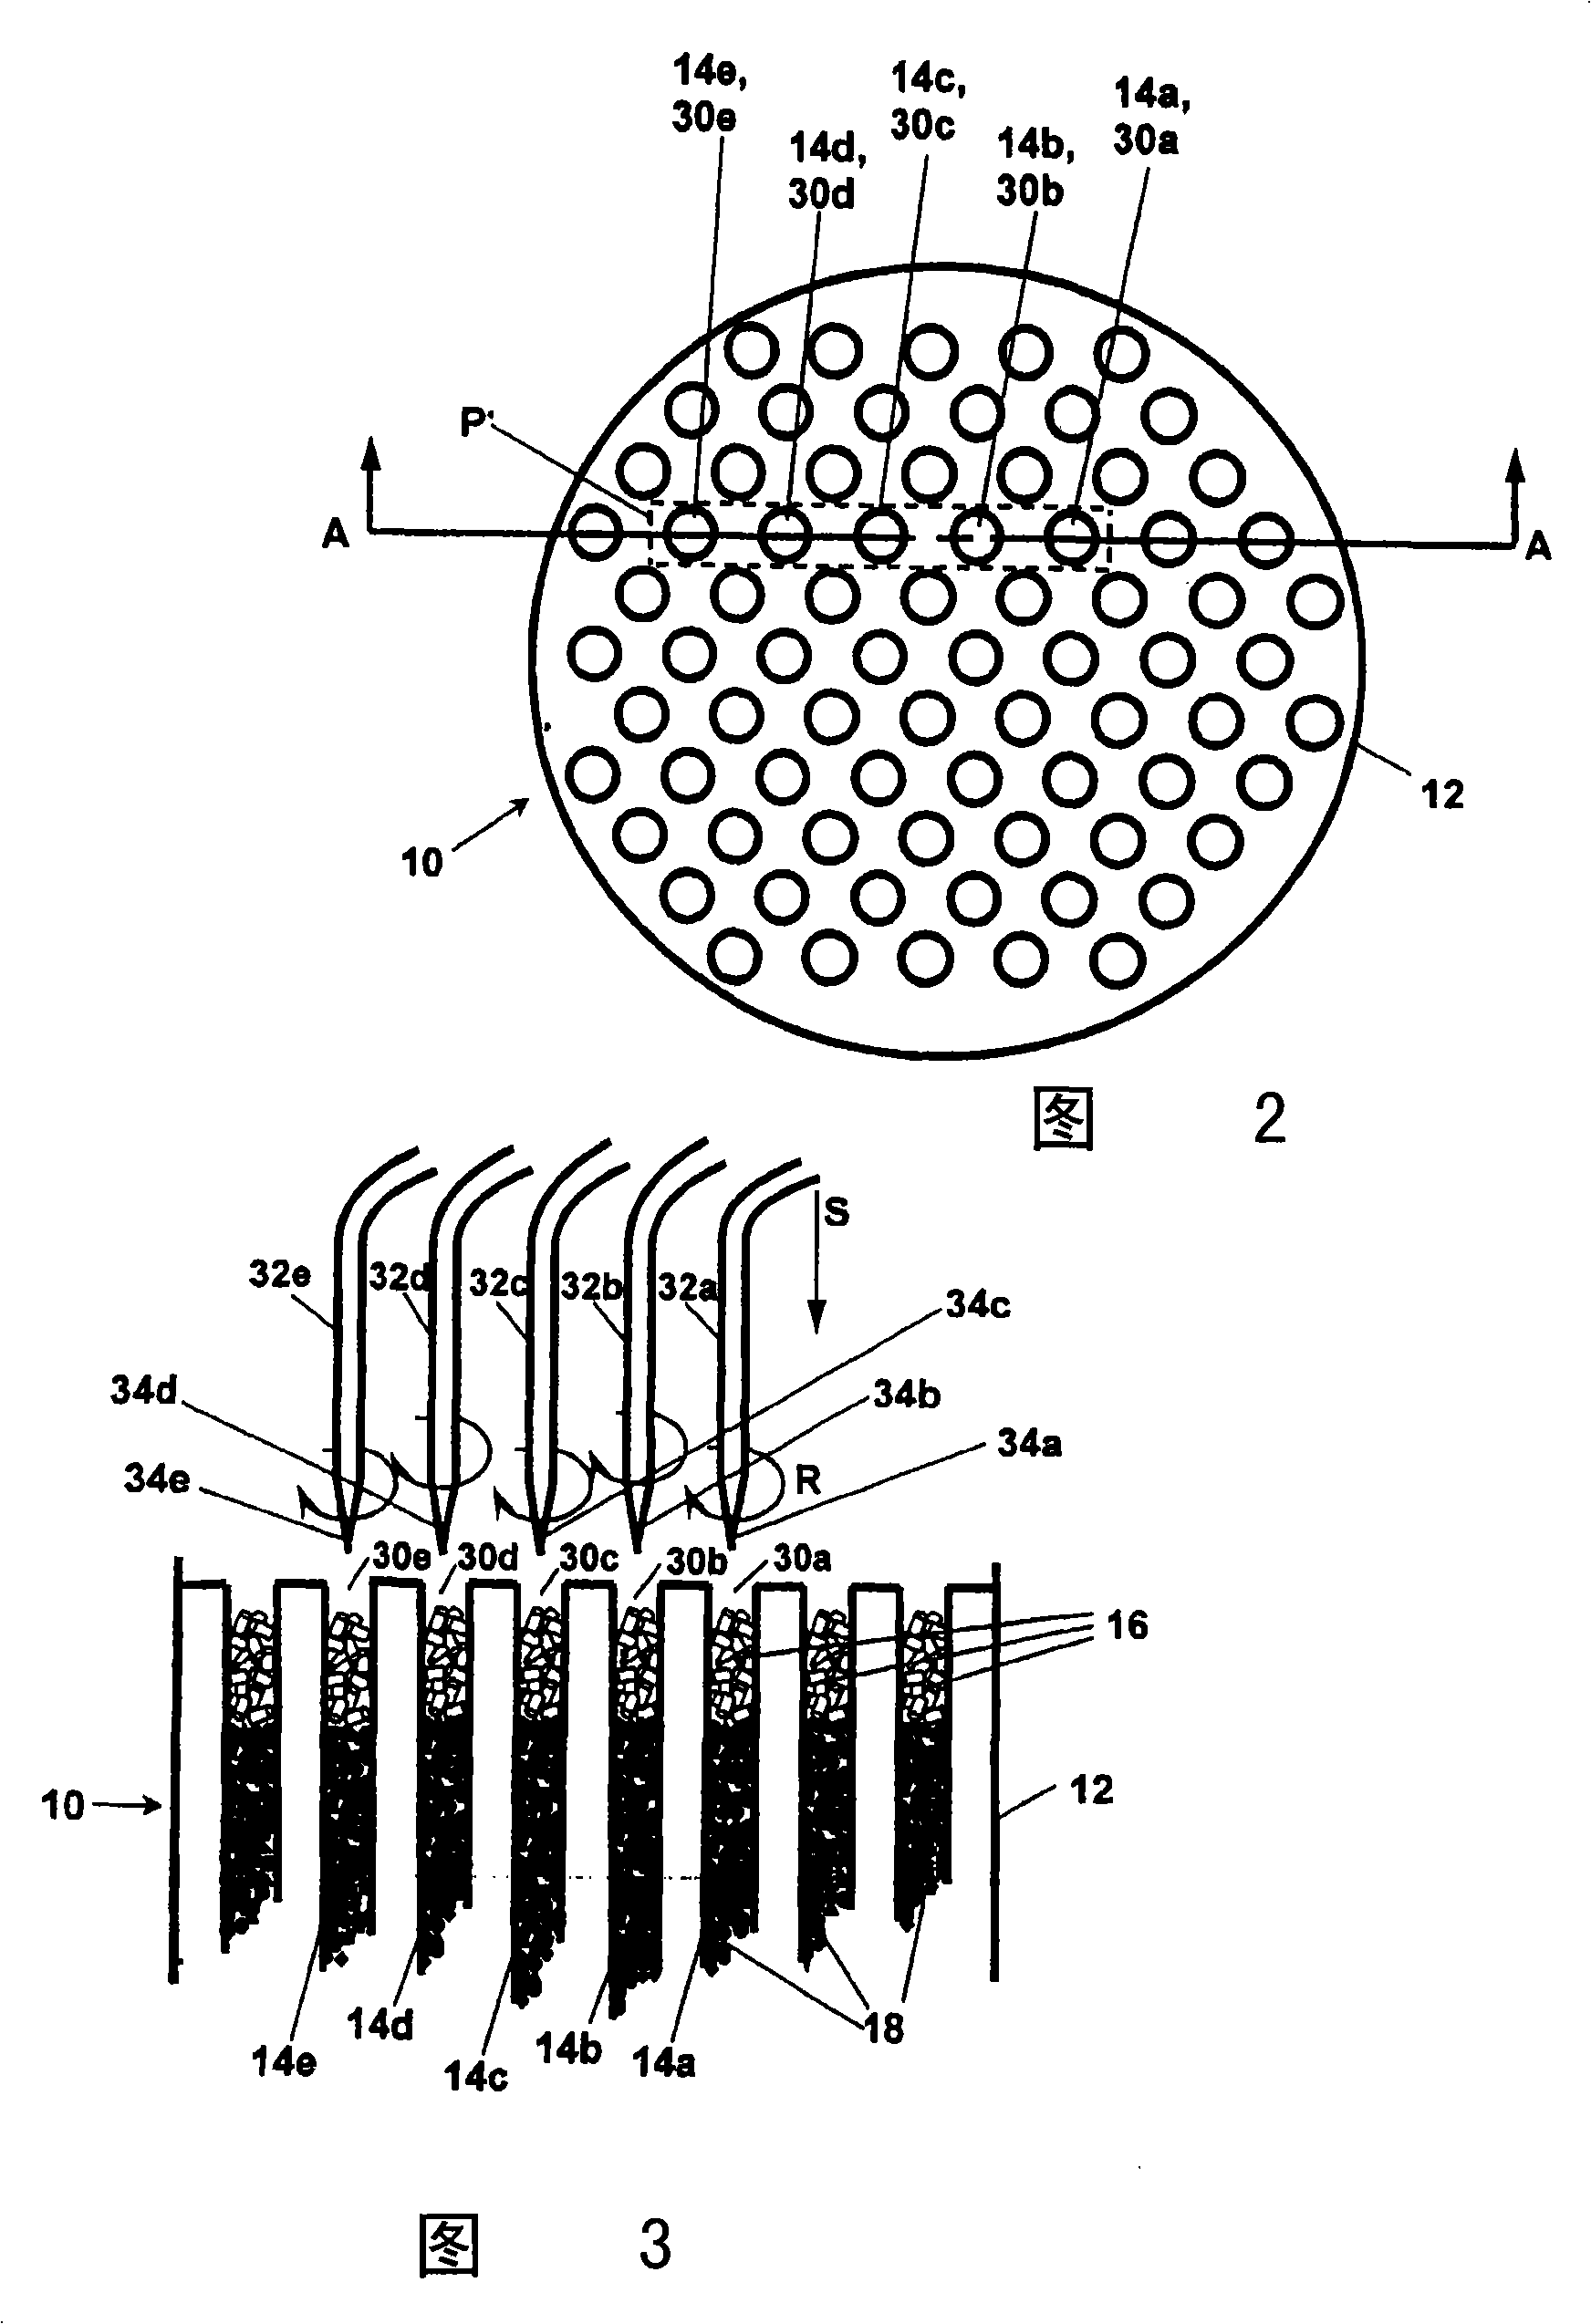 Apparatus and method for dislodging and extracting solid materials from tubes